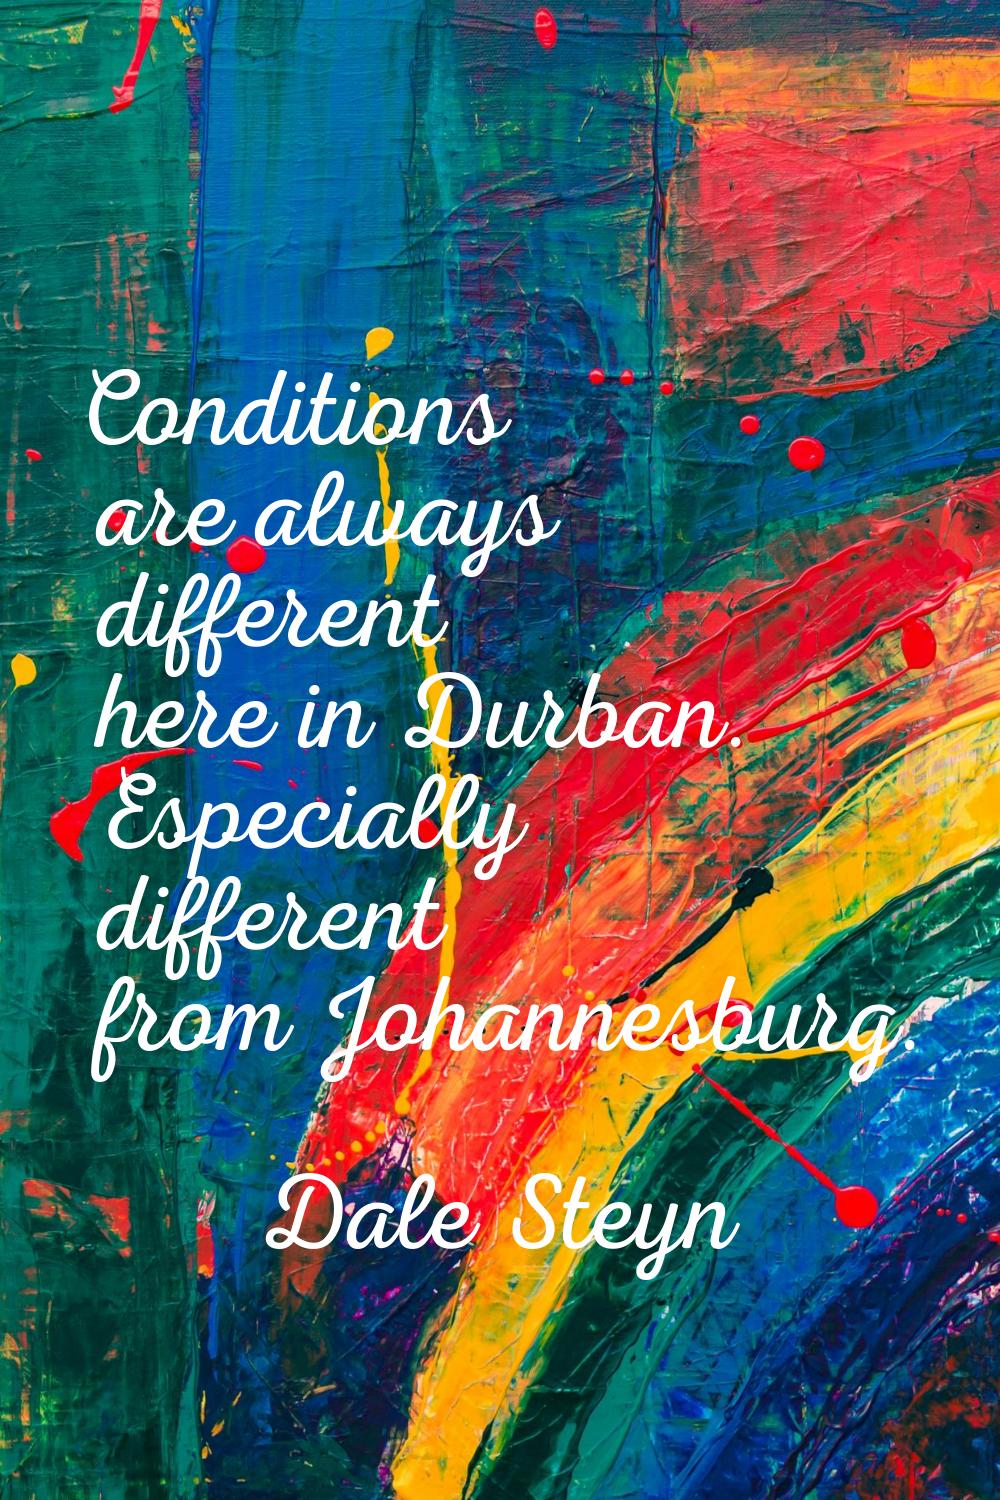 Conditions are always different here in Durban. Especially different from Johannesburg.